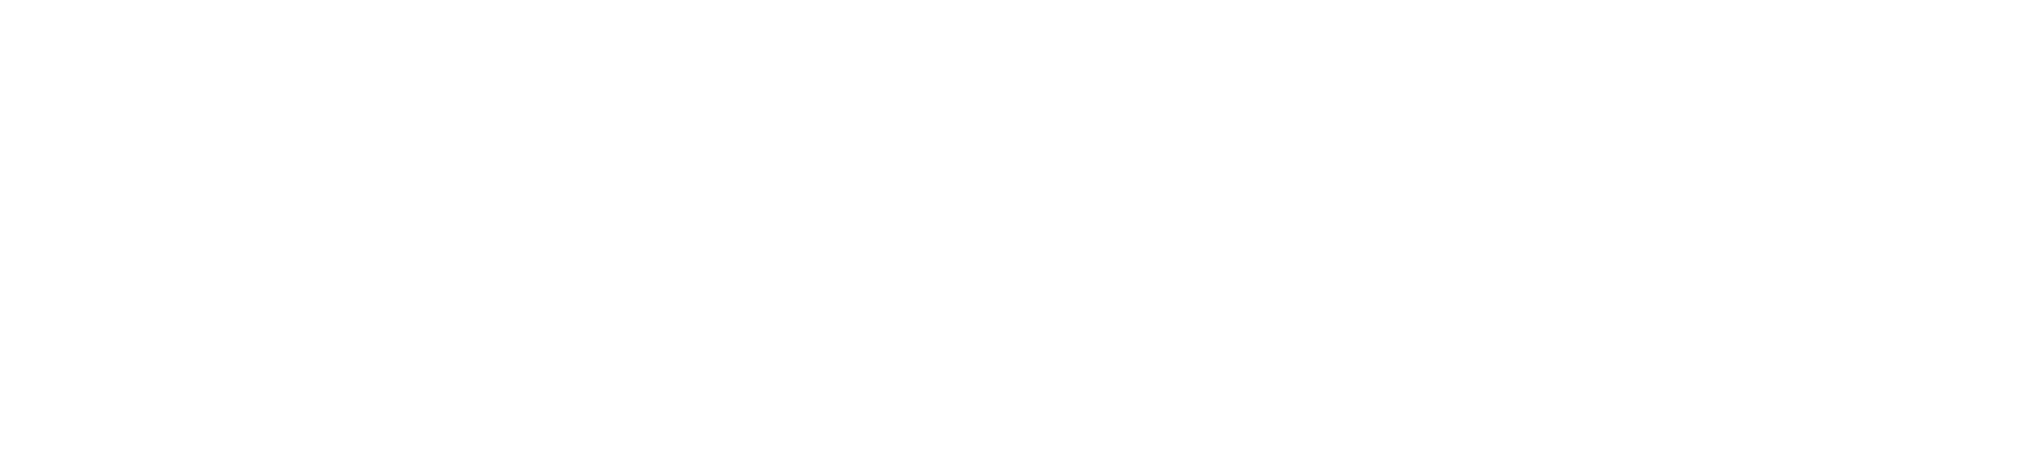 Military Clearinghouse for Family Readiness logo